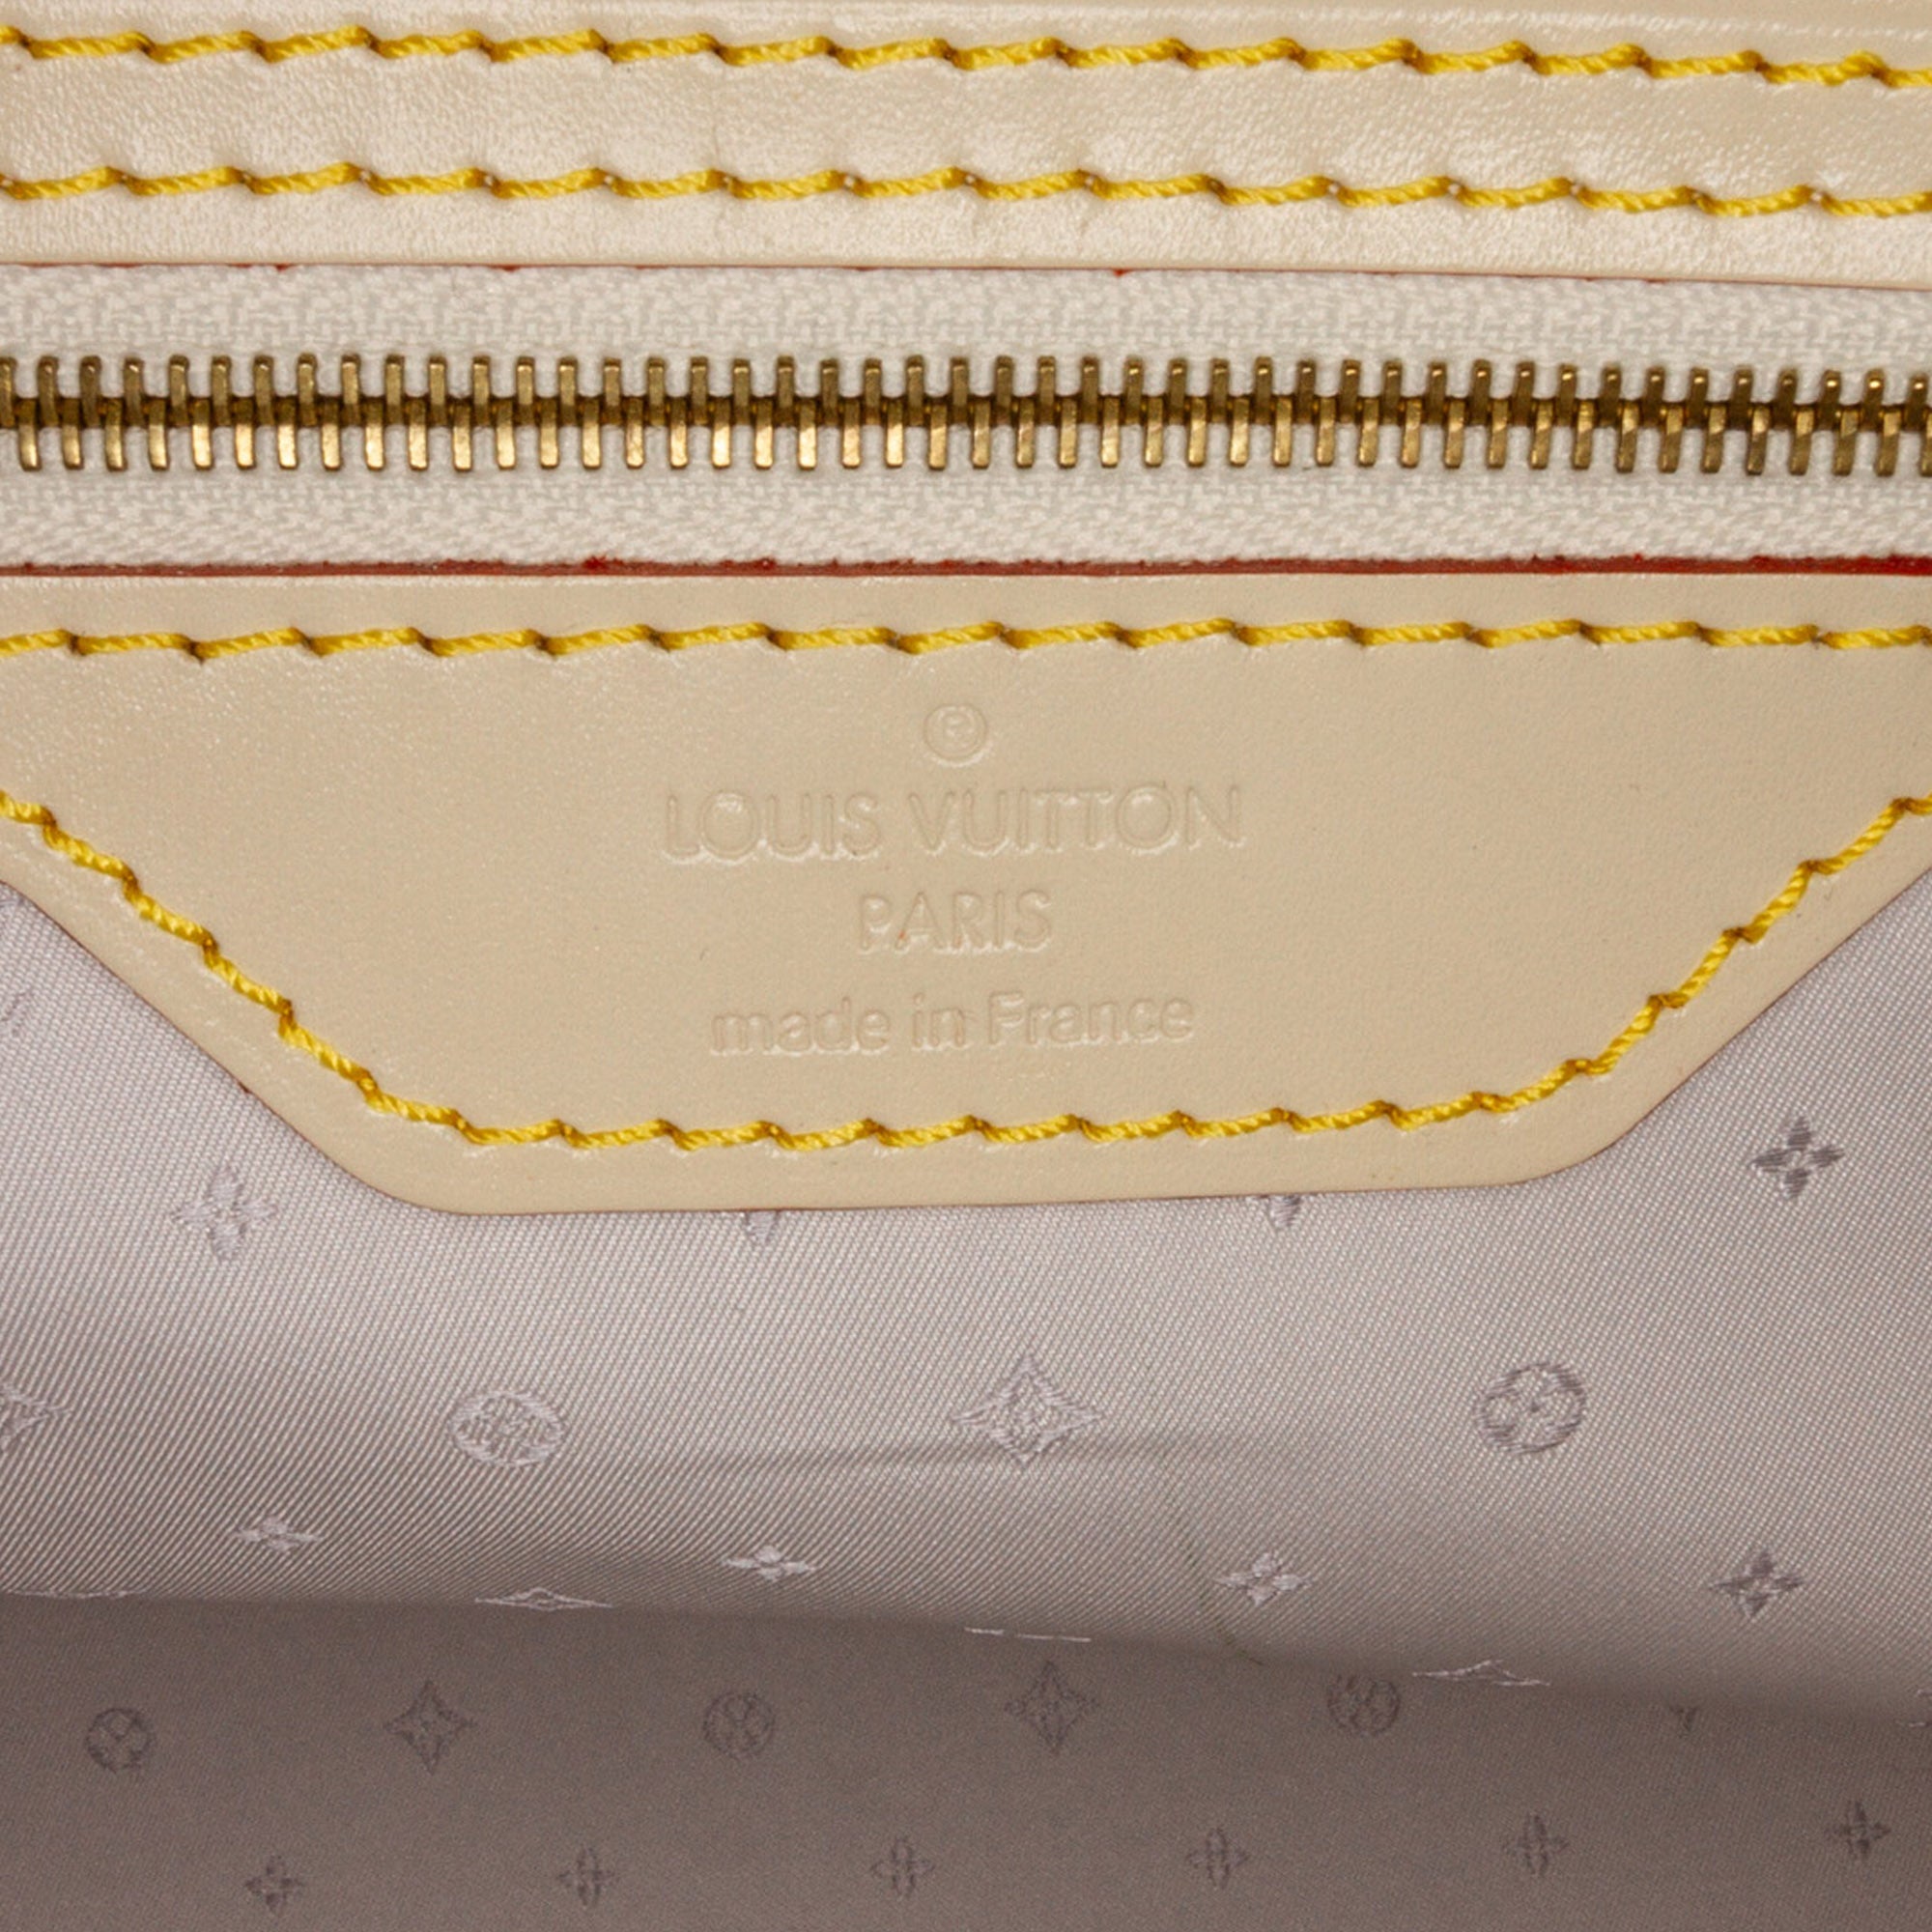 Louis Vuitton White Suhali Lockit PM Bag ○ Labellov ○ Buy and Sell  Authentic Luxury